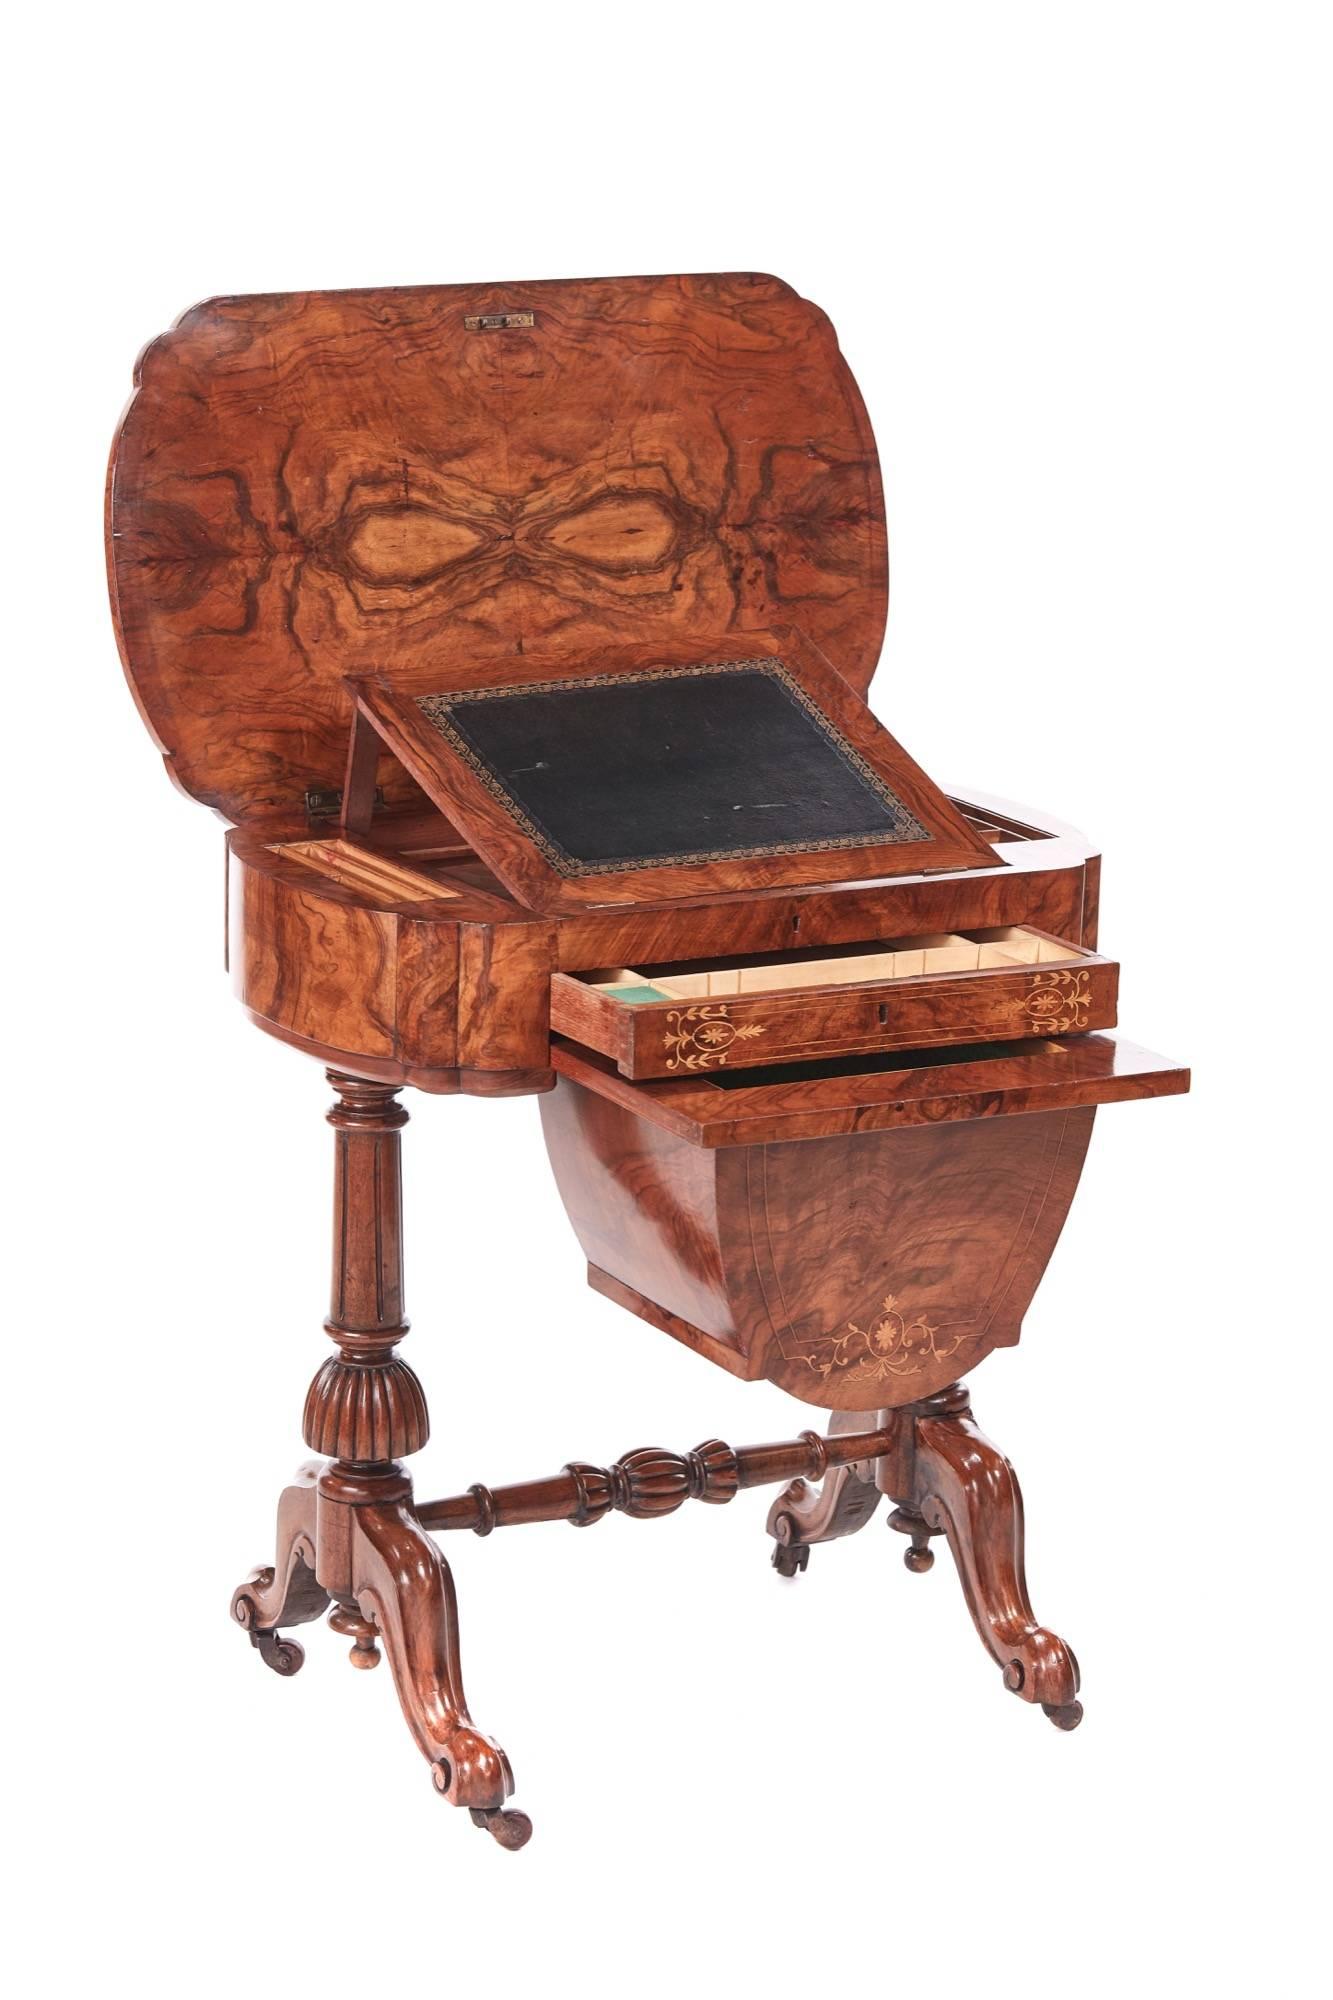 European Outstanding Victorian Freestanding Inlaid Burr Walnut Writing or Sewing Table For Sale